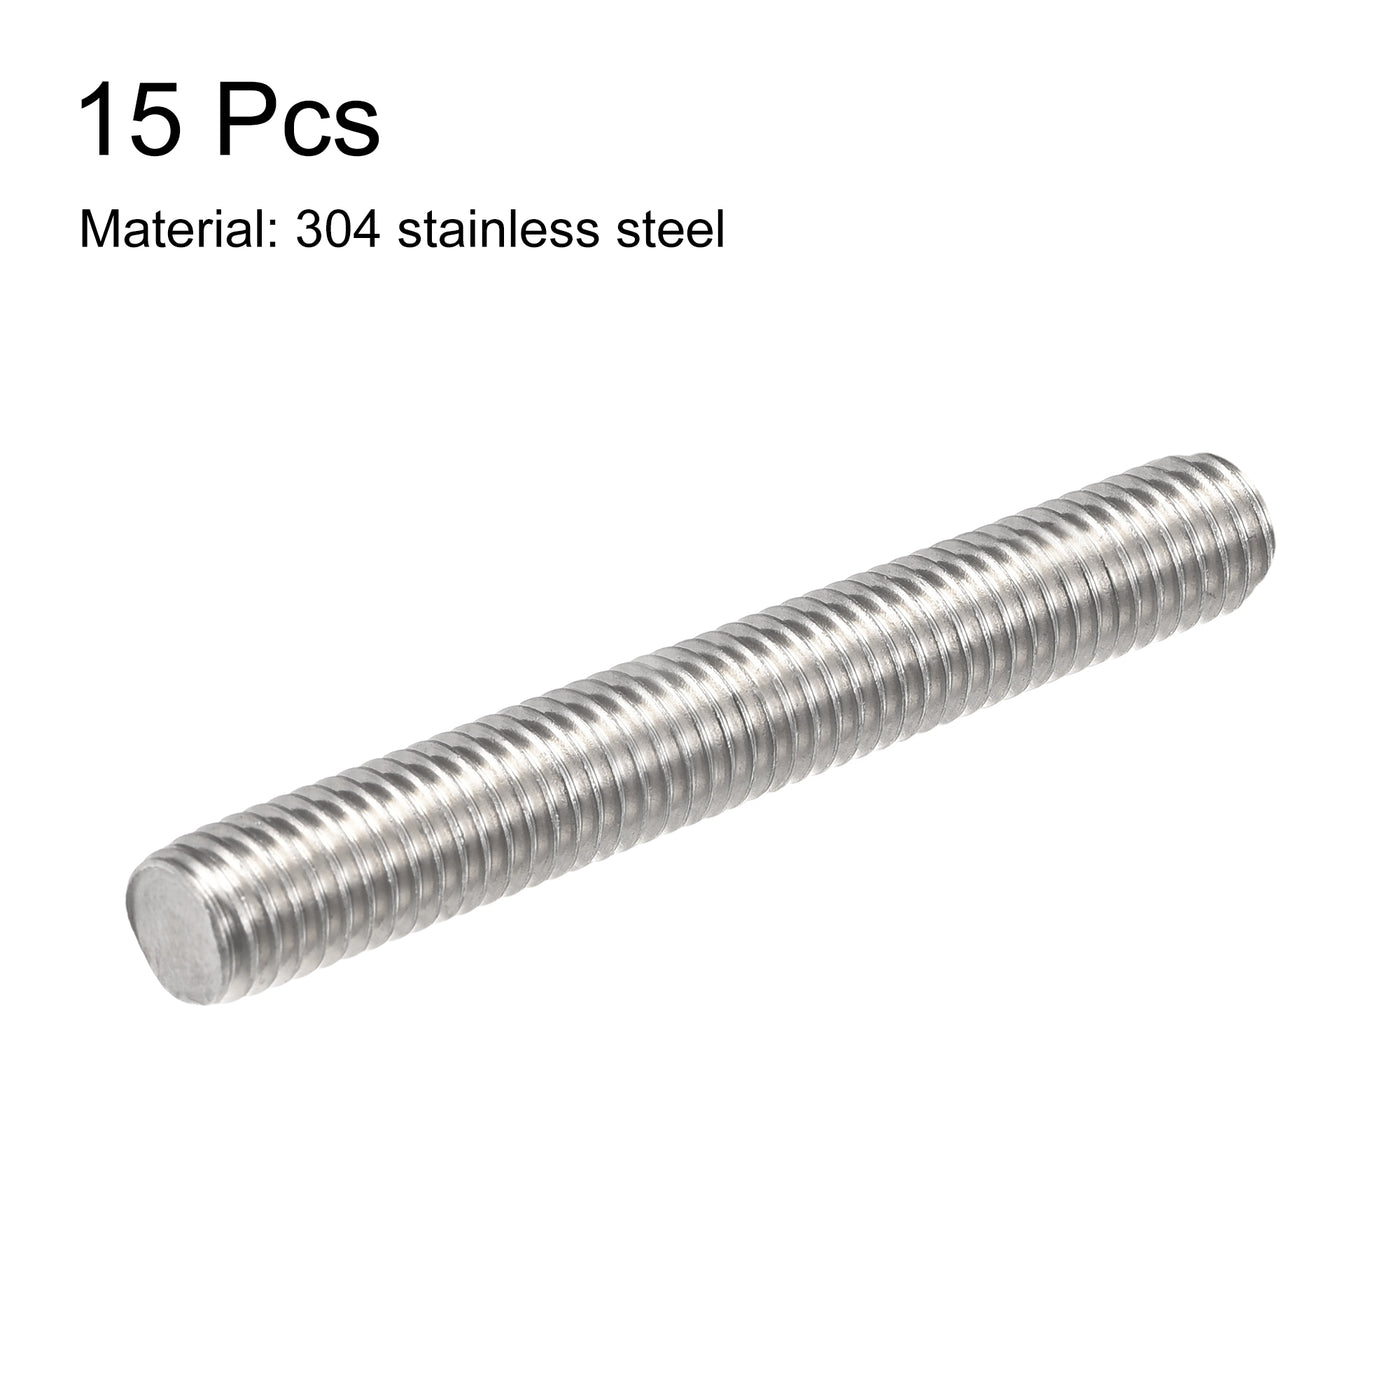 uxcell Uxcell 15pcs M8 x 60mm Fully Threaded Rod 304 Stainless Steel Right Hand Threads